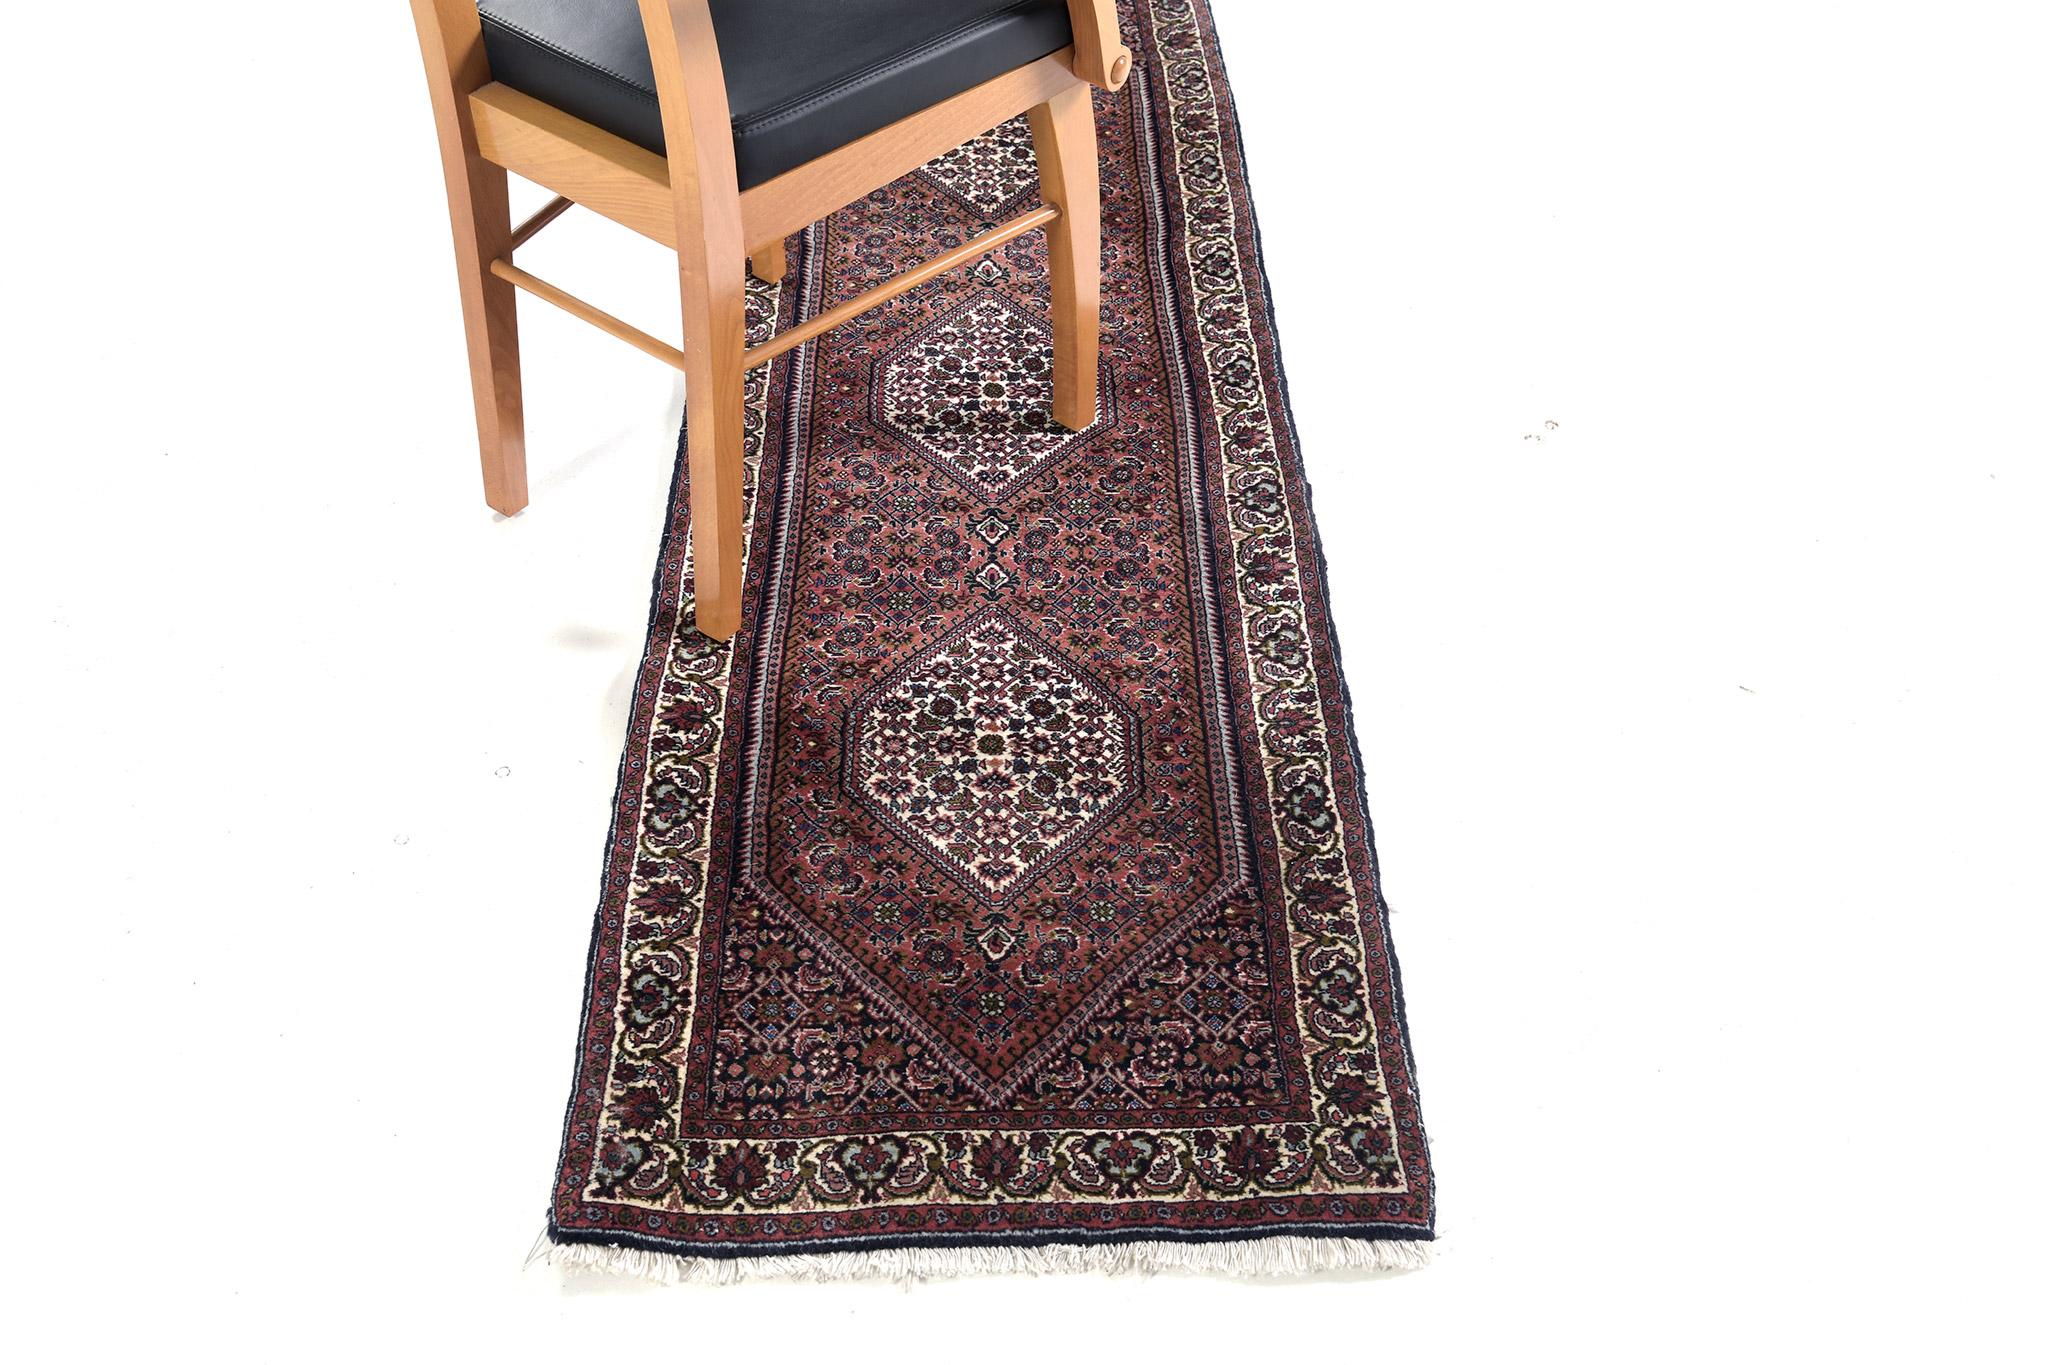 A sophisticated Persian Bidjar Runner that features three hexagonal lozenge medallions composed of symmetrical botanical elements in the majestic and regal tones of rust and ivory. This refined rug charms with ease and beautifully embodies dainty